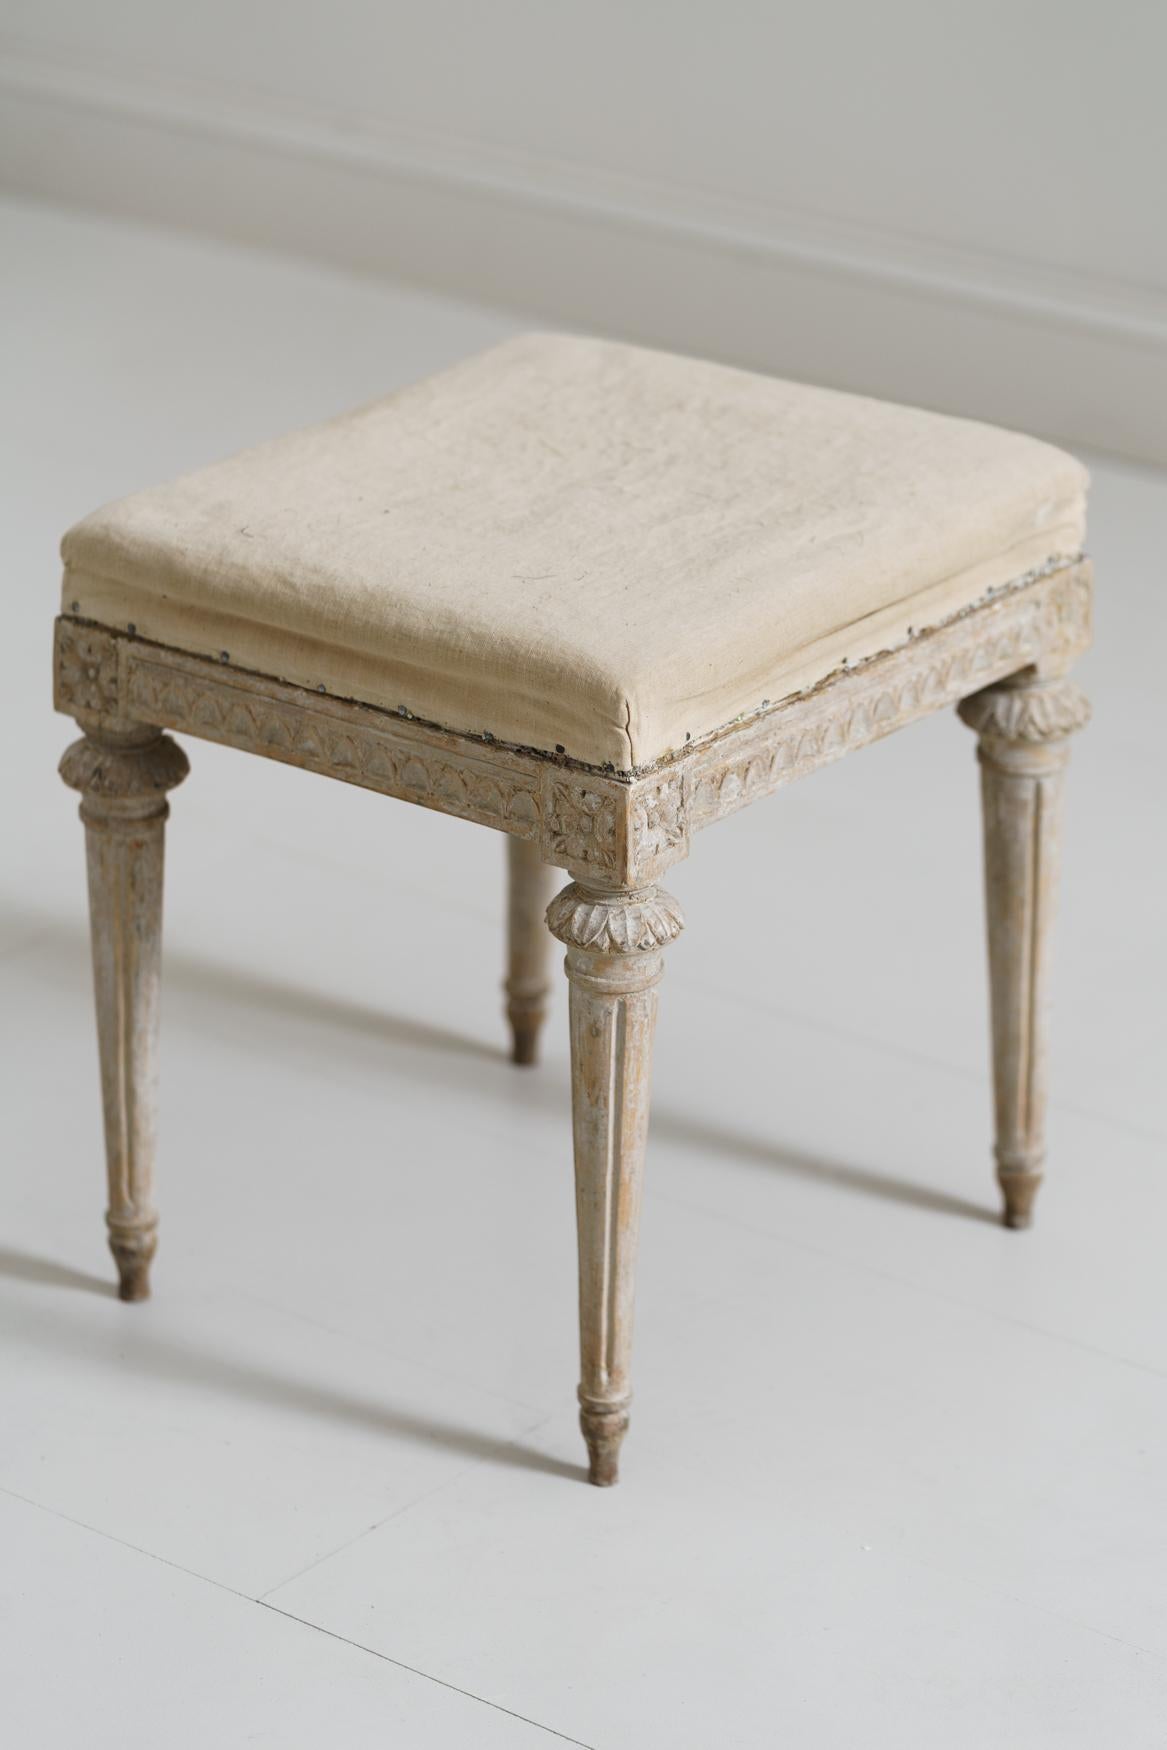 18th Century Pair of Swedish Gustavian Period Foot Stools or Benches 2